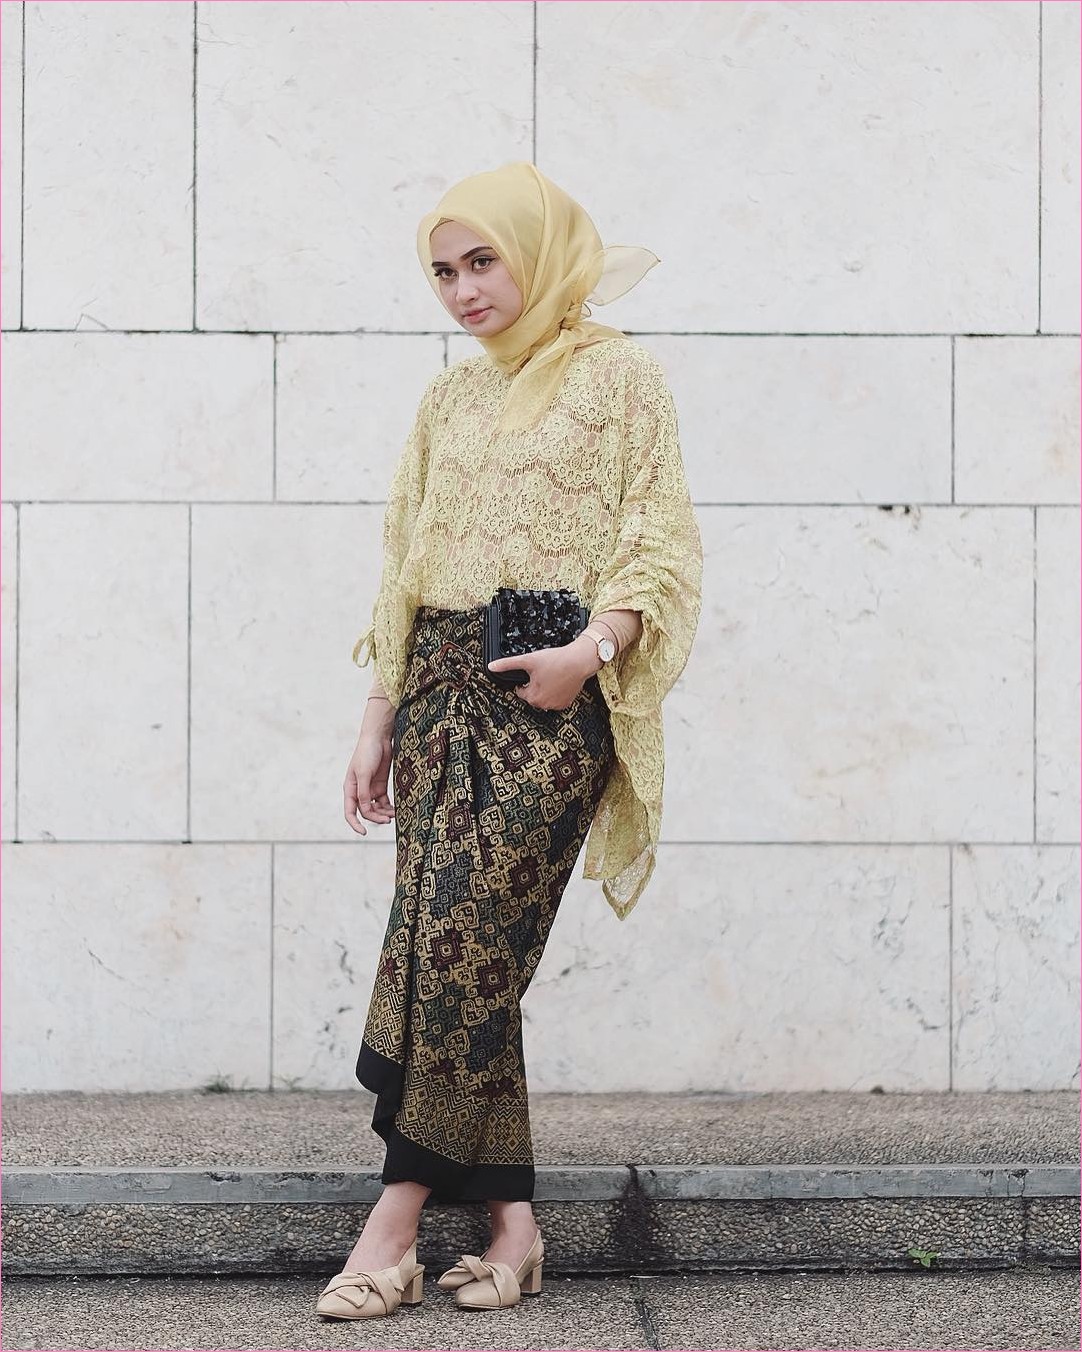  OOTD  kondangan  Hijab  outfit in 2019 Ootd  Hijab  outfit t